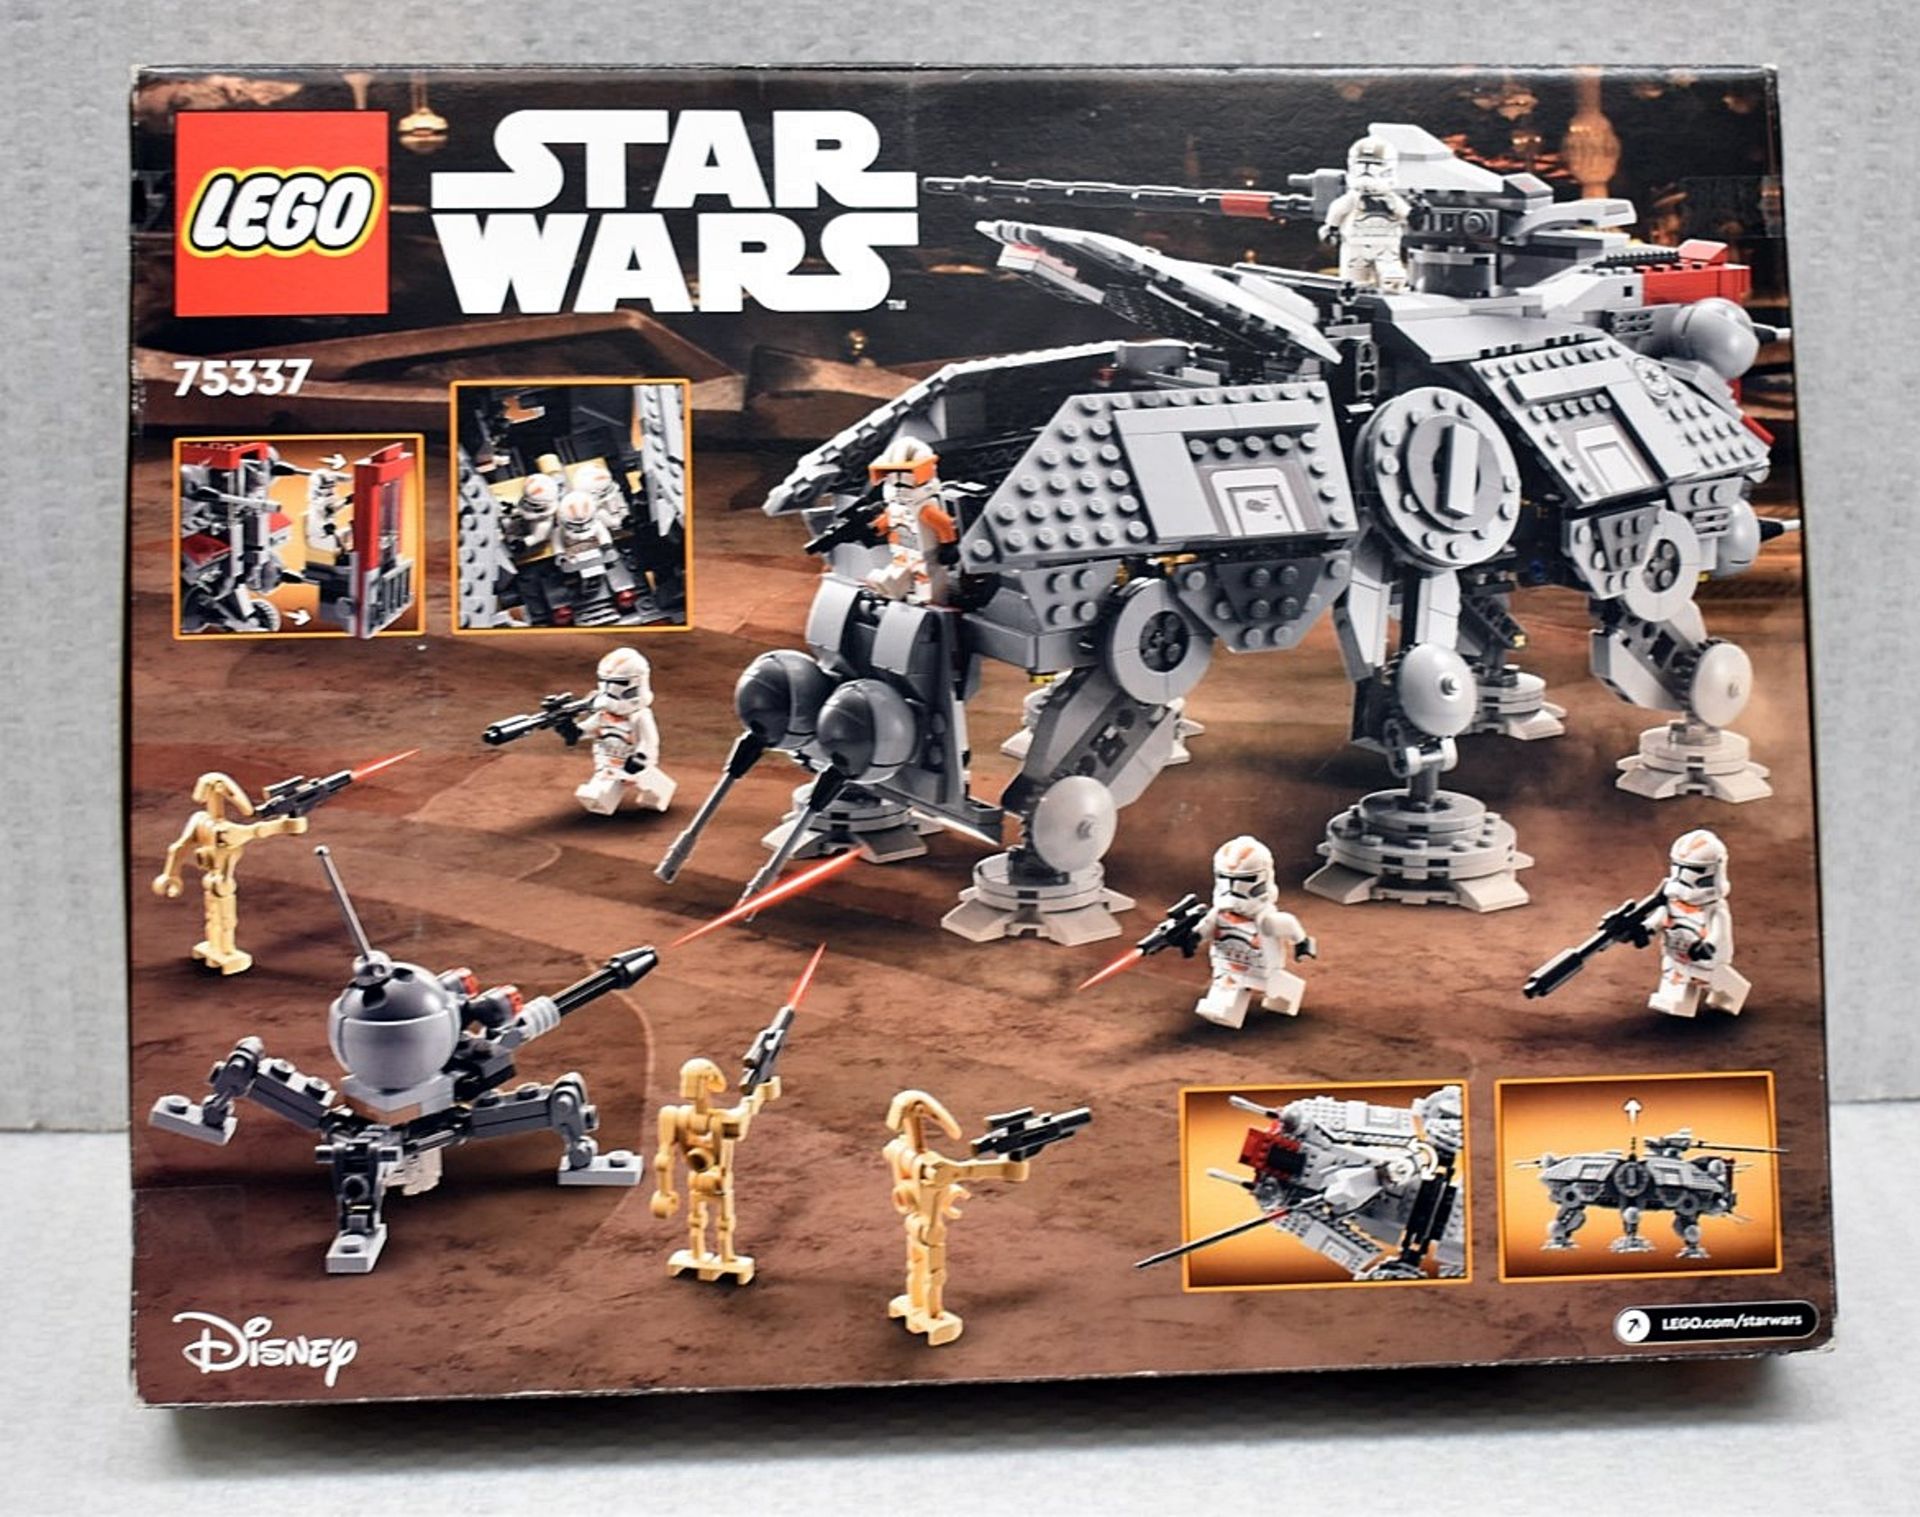 1 x LEGO Star Wars AT-TE Walker Buildable Toy 75337 - Original Price £139.00 - Unused Boxed - Image 2 of 4